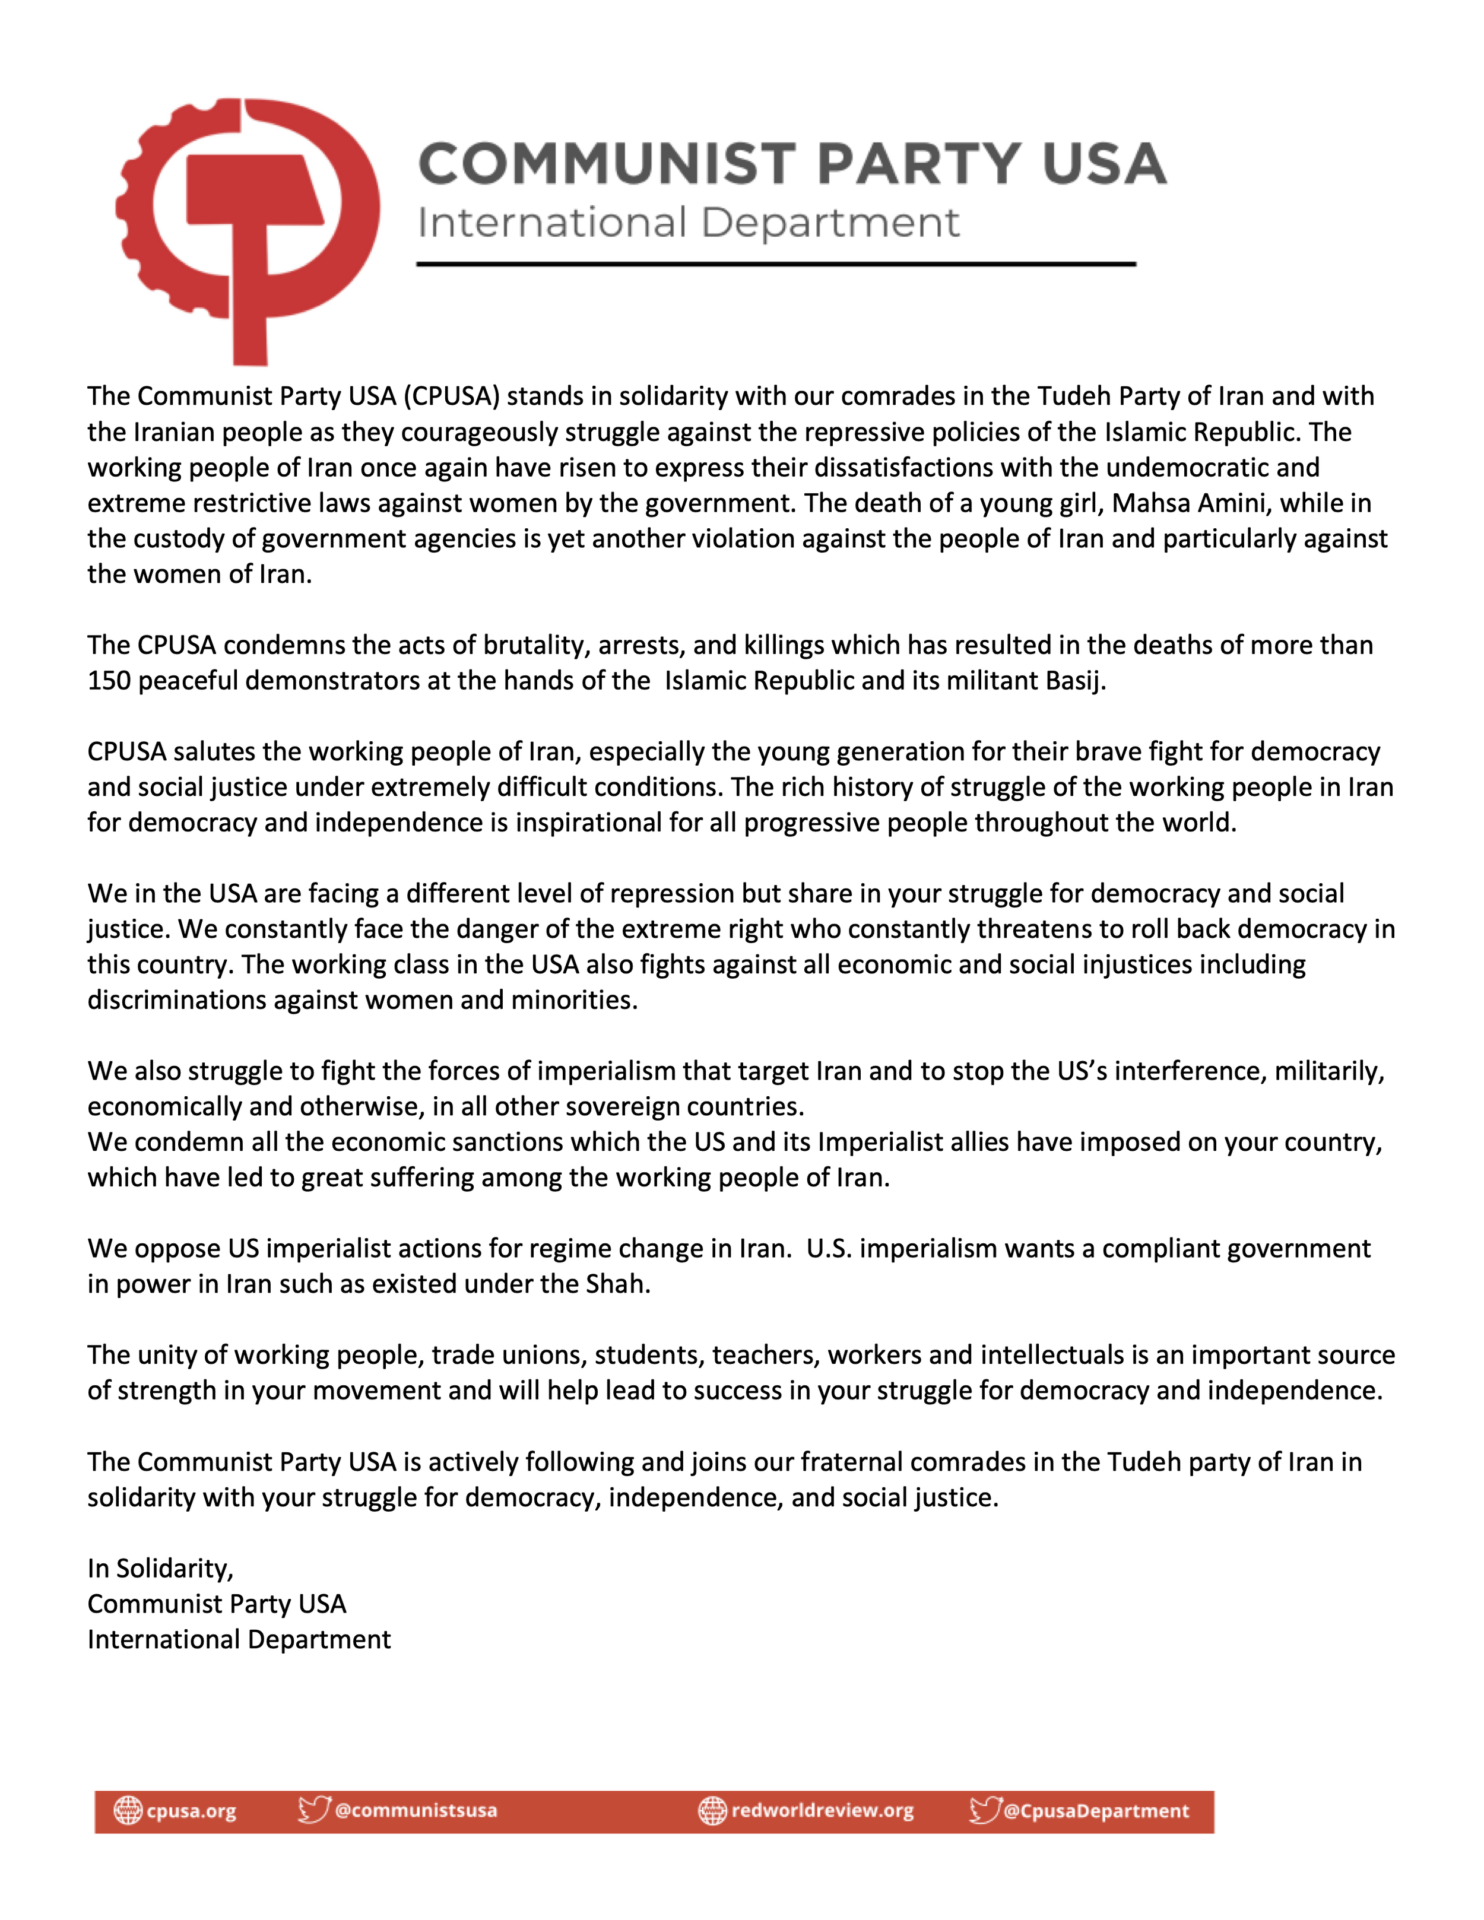 CPUSA Letter of Solidarity with the Tudeh Party of Iran